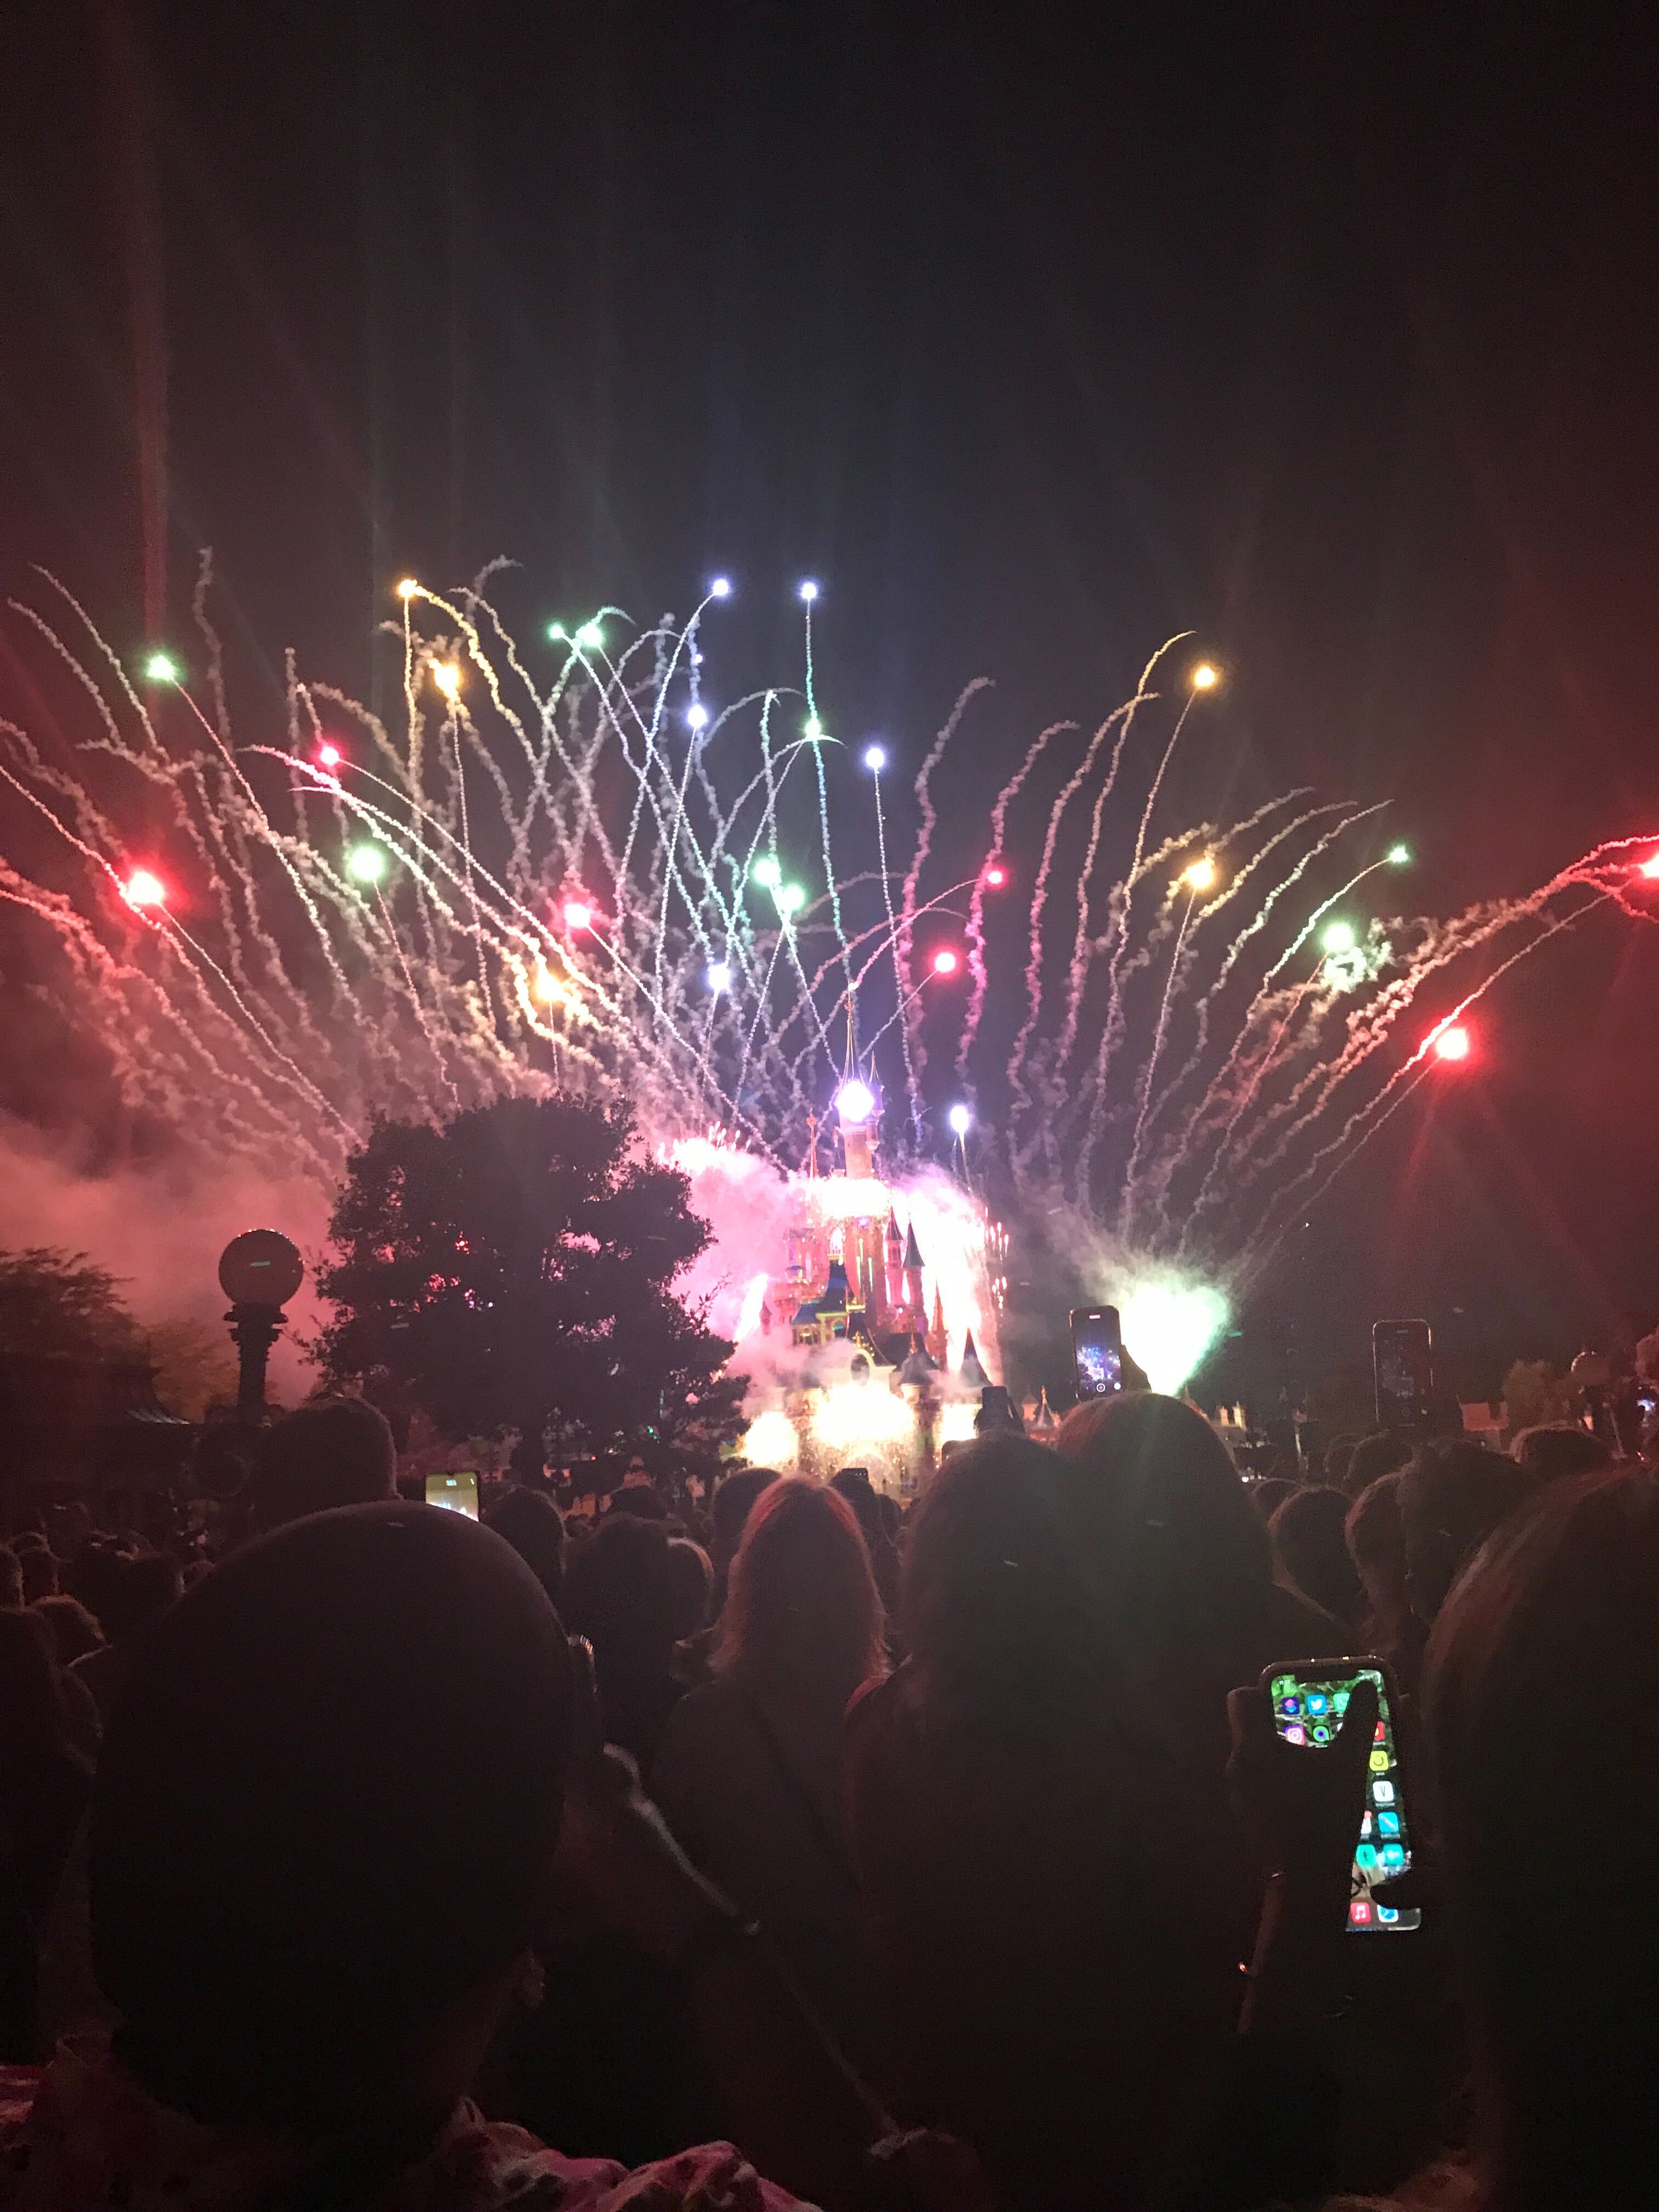 A night with fireworks and a crowd of people watching it